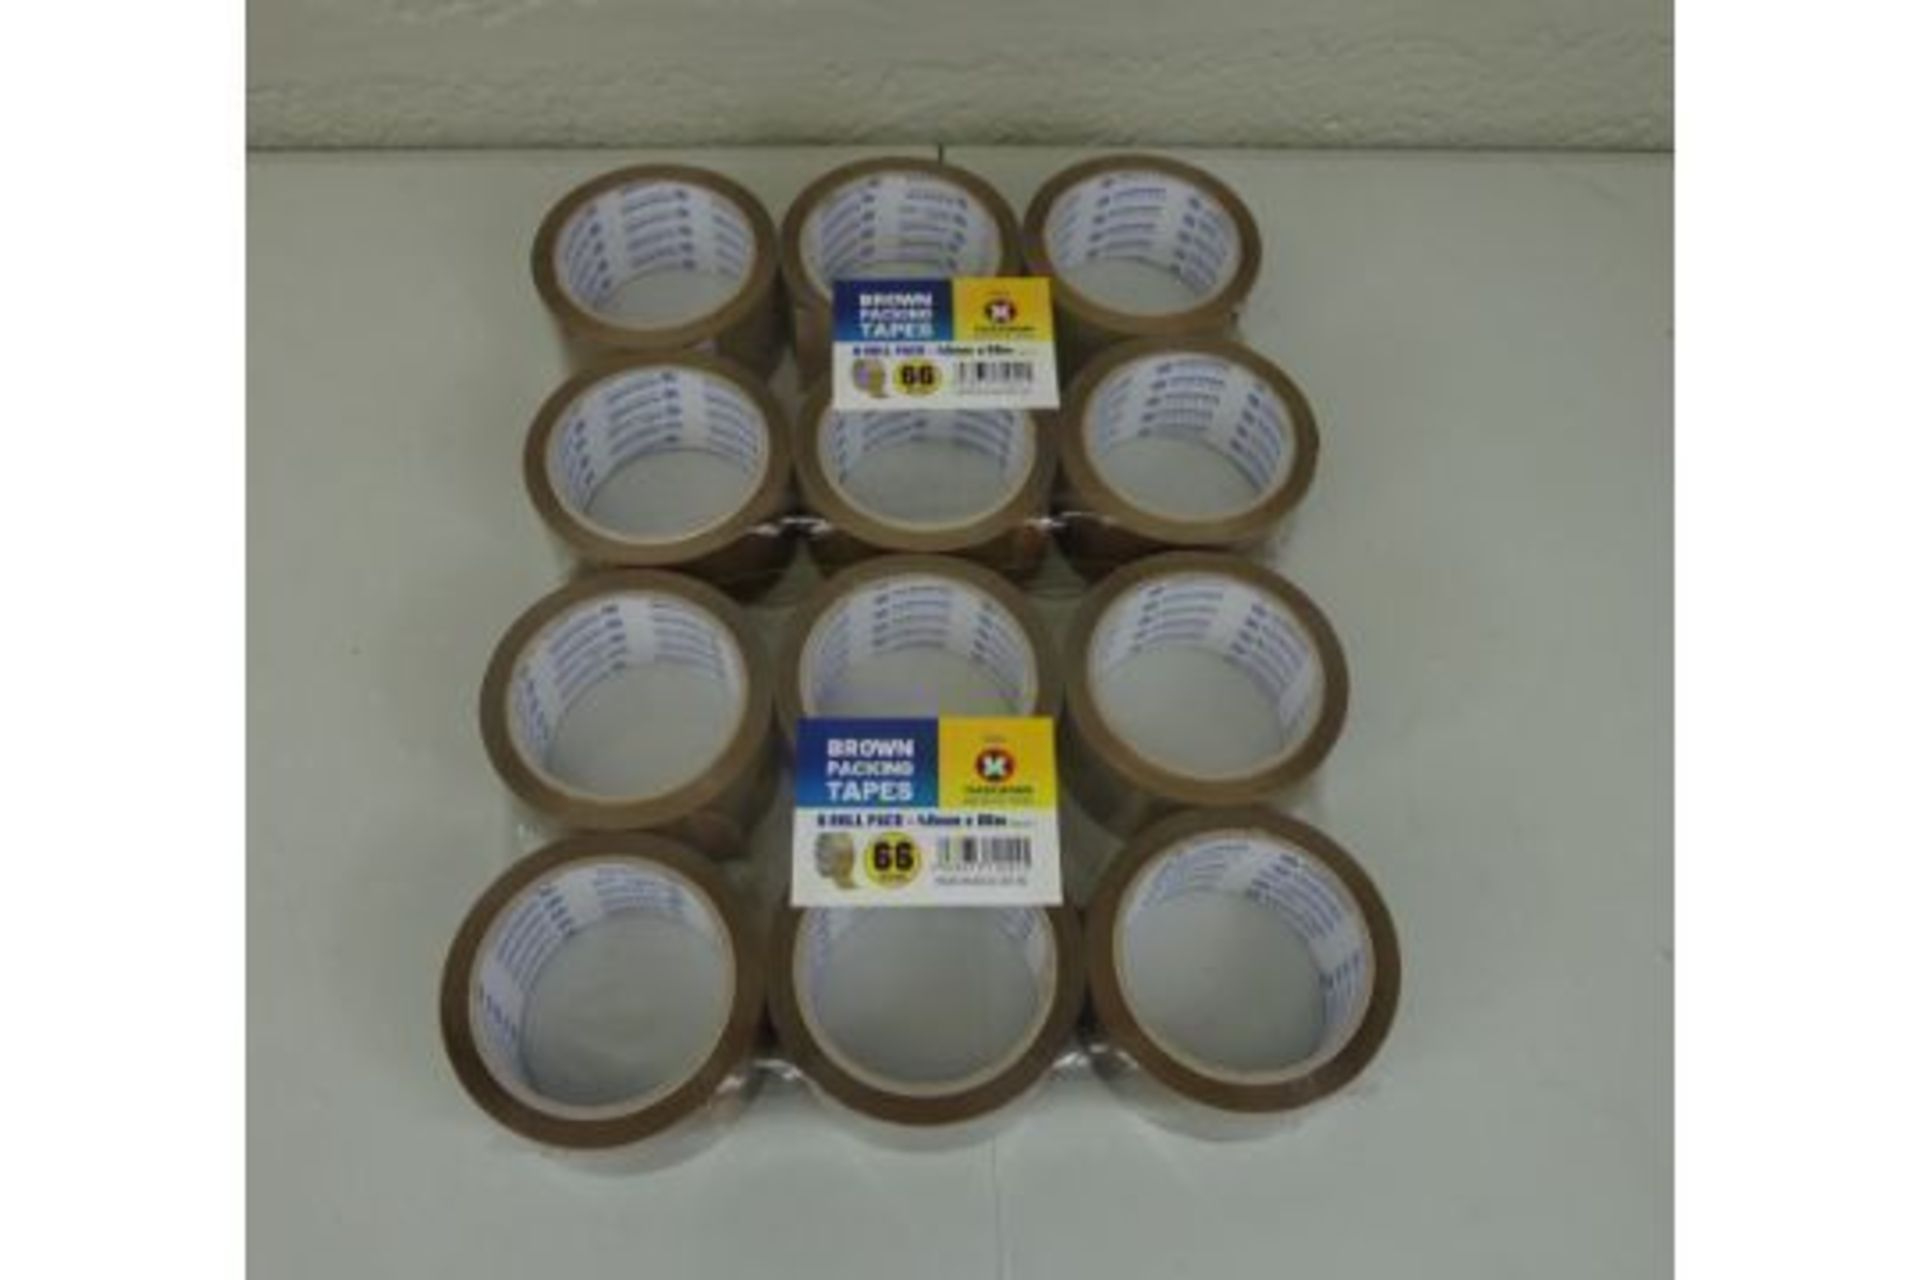 x12 Rolls 48mm x 66m Brown Packing Tape (2 packs of 6)